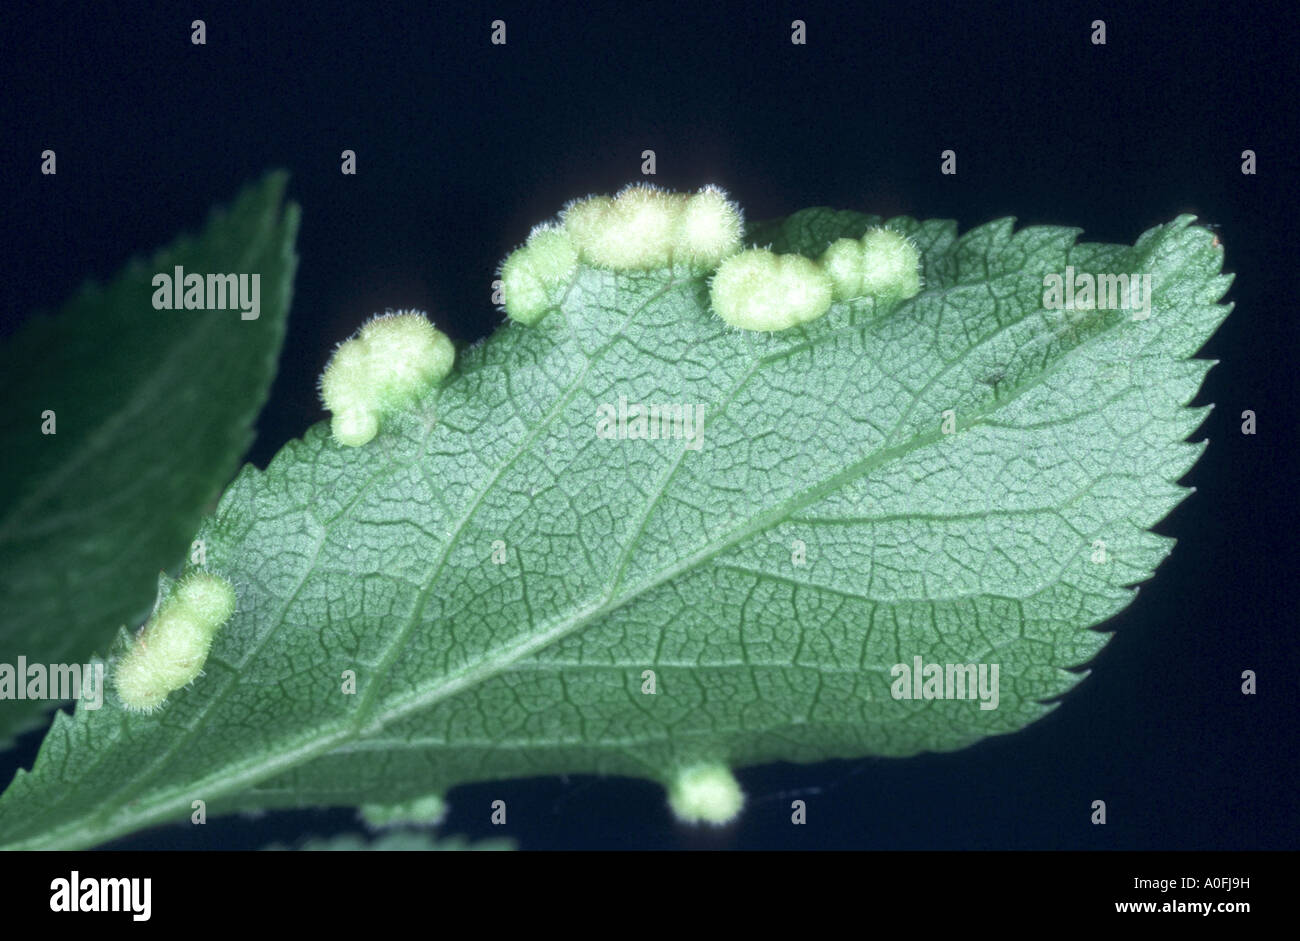 gall mites, eriophyiid mites (Eriophyiidae), galls on a leaf Stock Photo